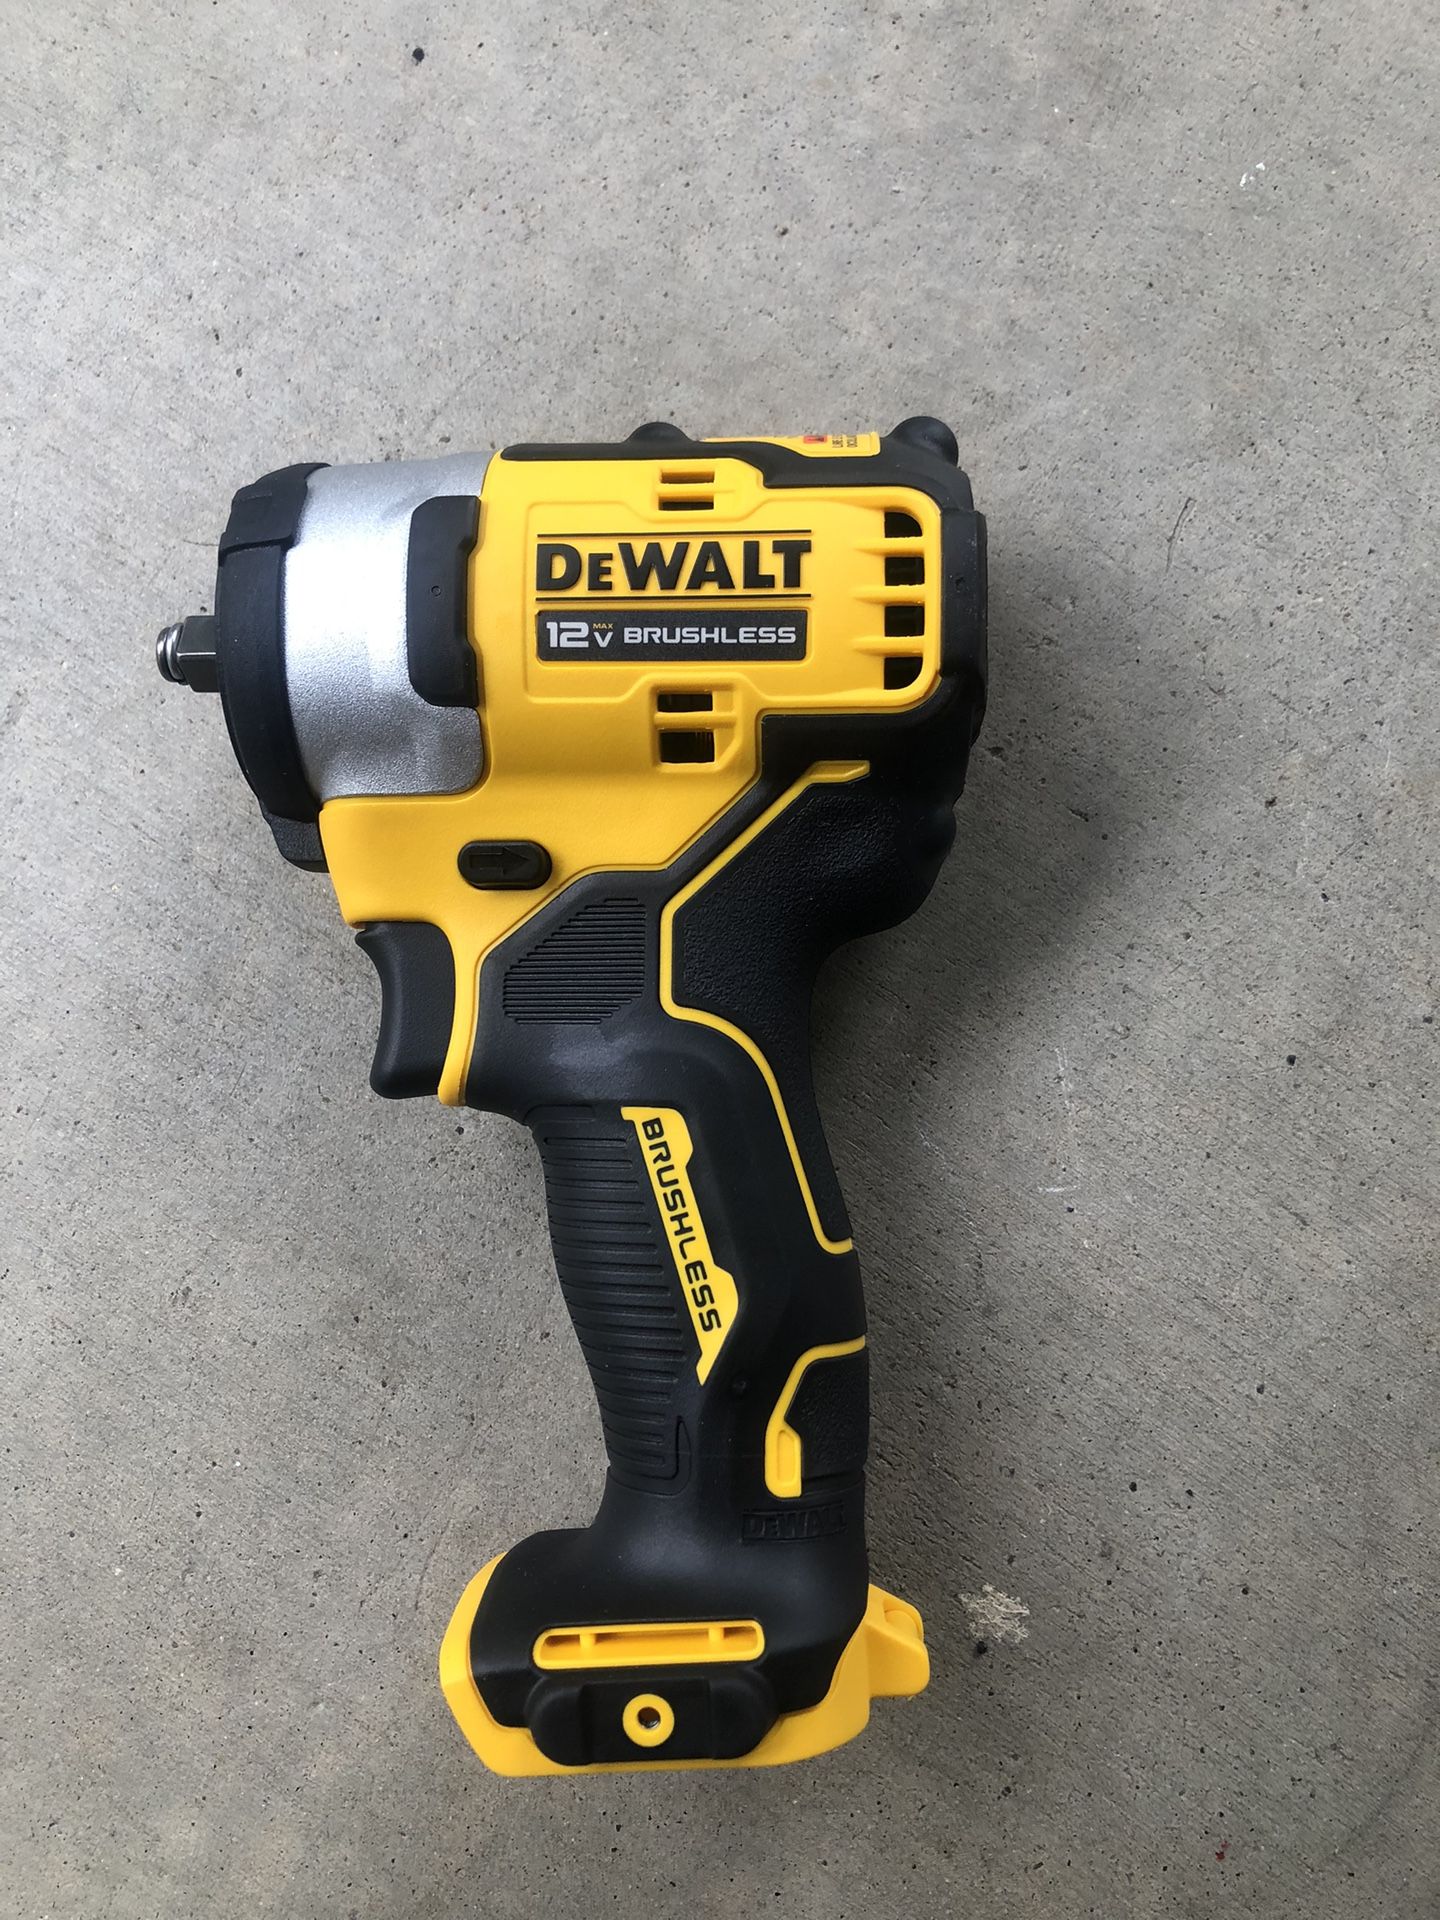 DEWALT 12-volt Max Variable Speed Drushless 3/8-in Drive Cordless Impact Wrench (bare Tool)